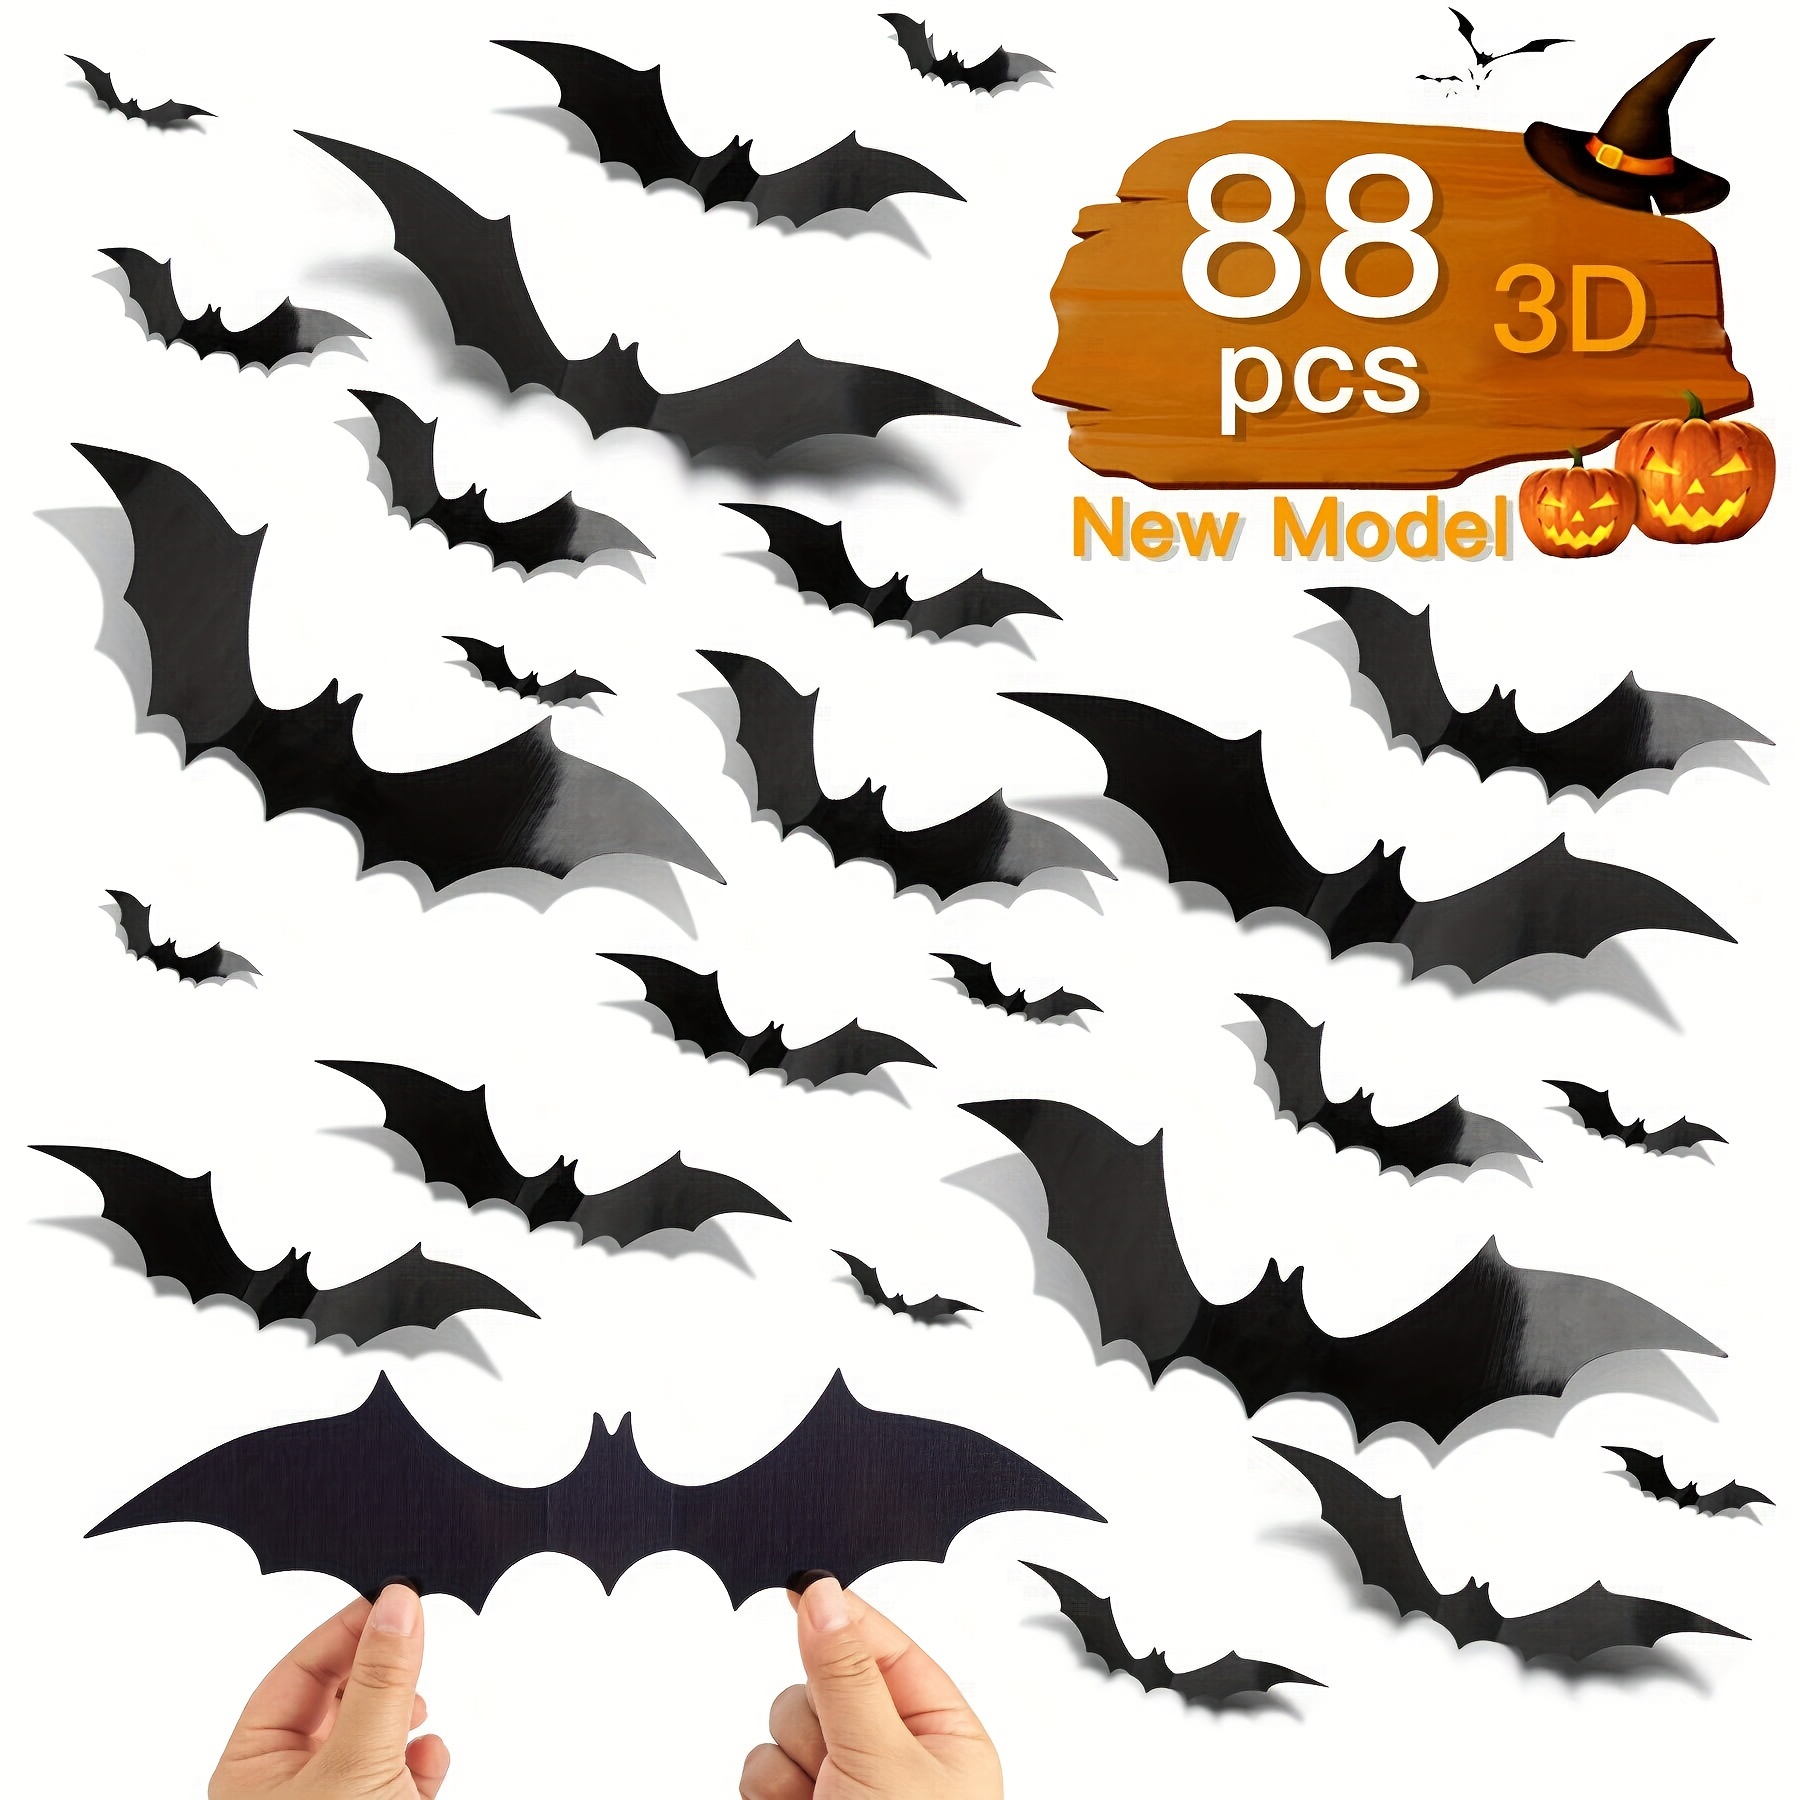 

Bats Wall Decor, 88 Pcs Diy 3d Bats Halloween Decorations, 4 Different Sizes Pvc Bat Stickers For Home Decor/indoor Party Decorations, Double-sided Adhesive Included